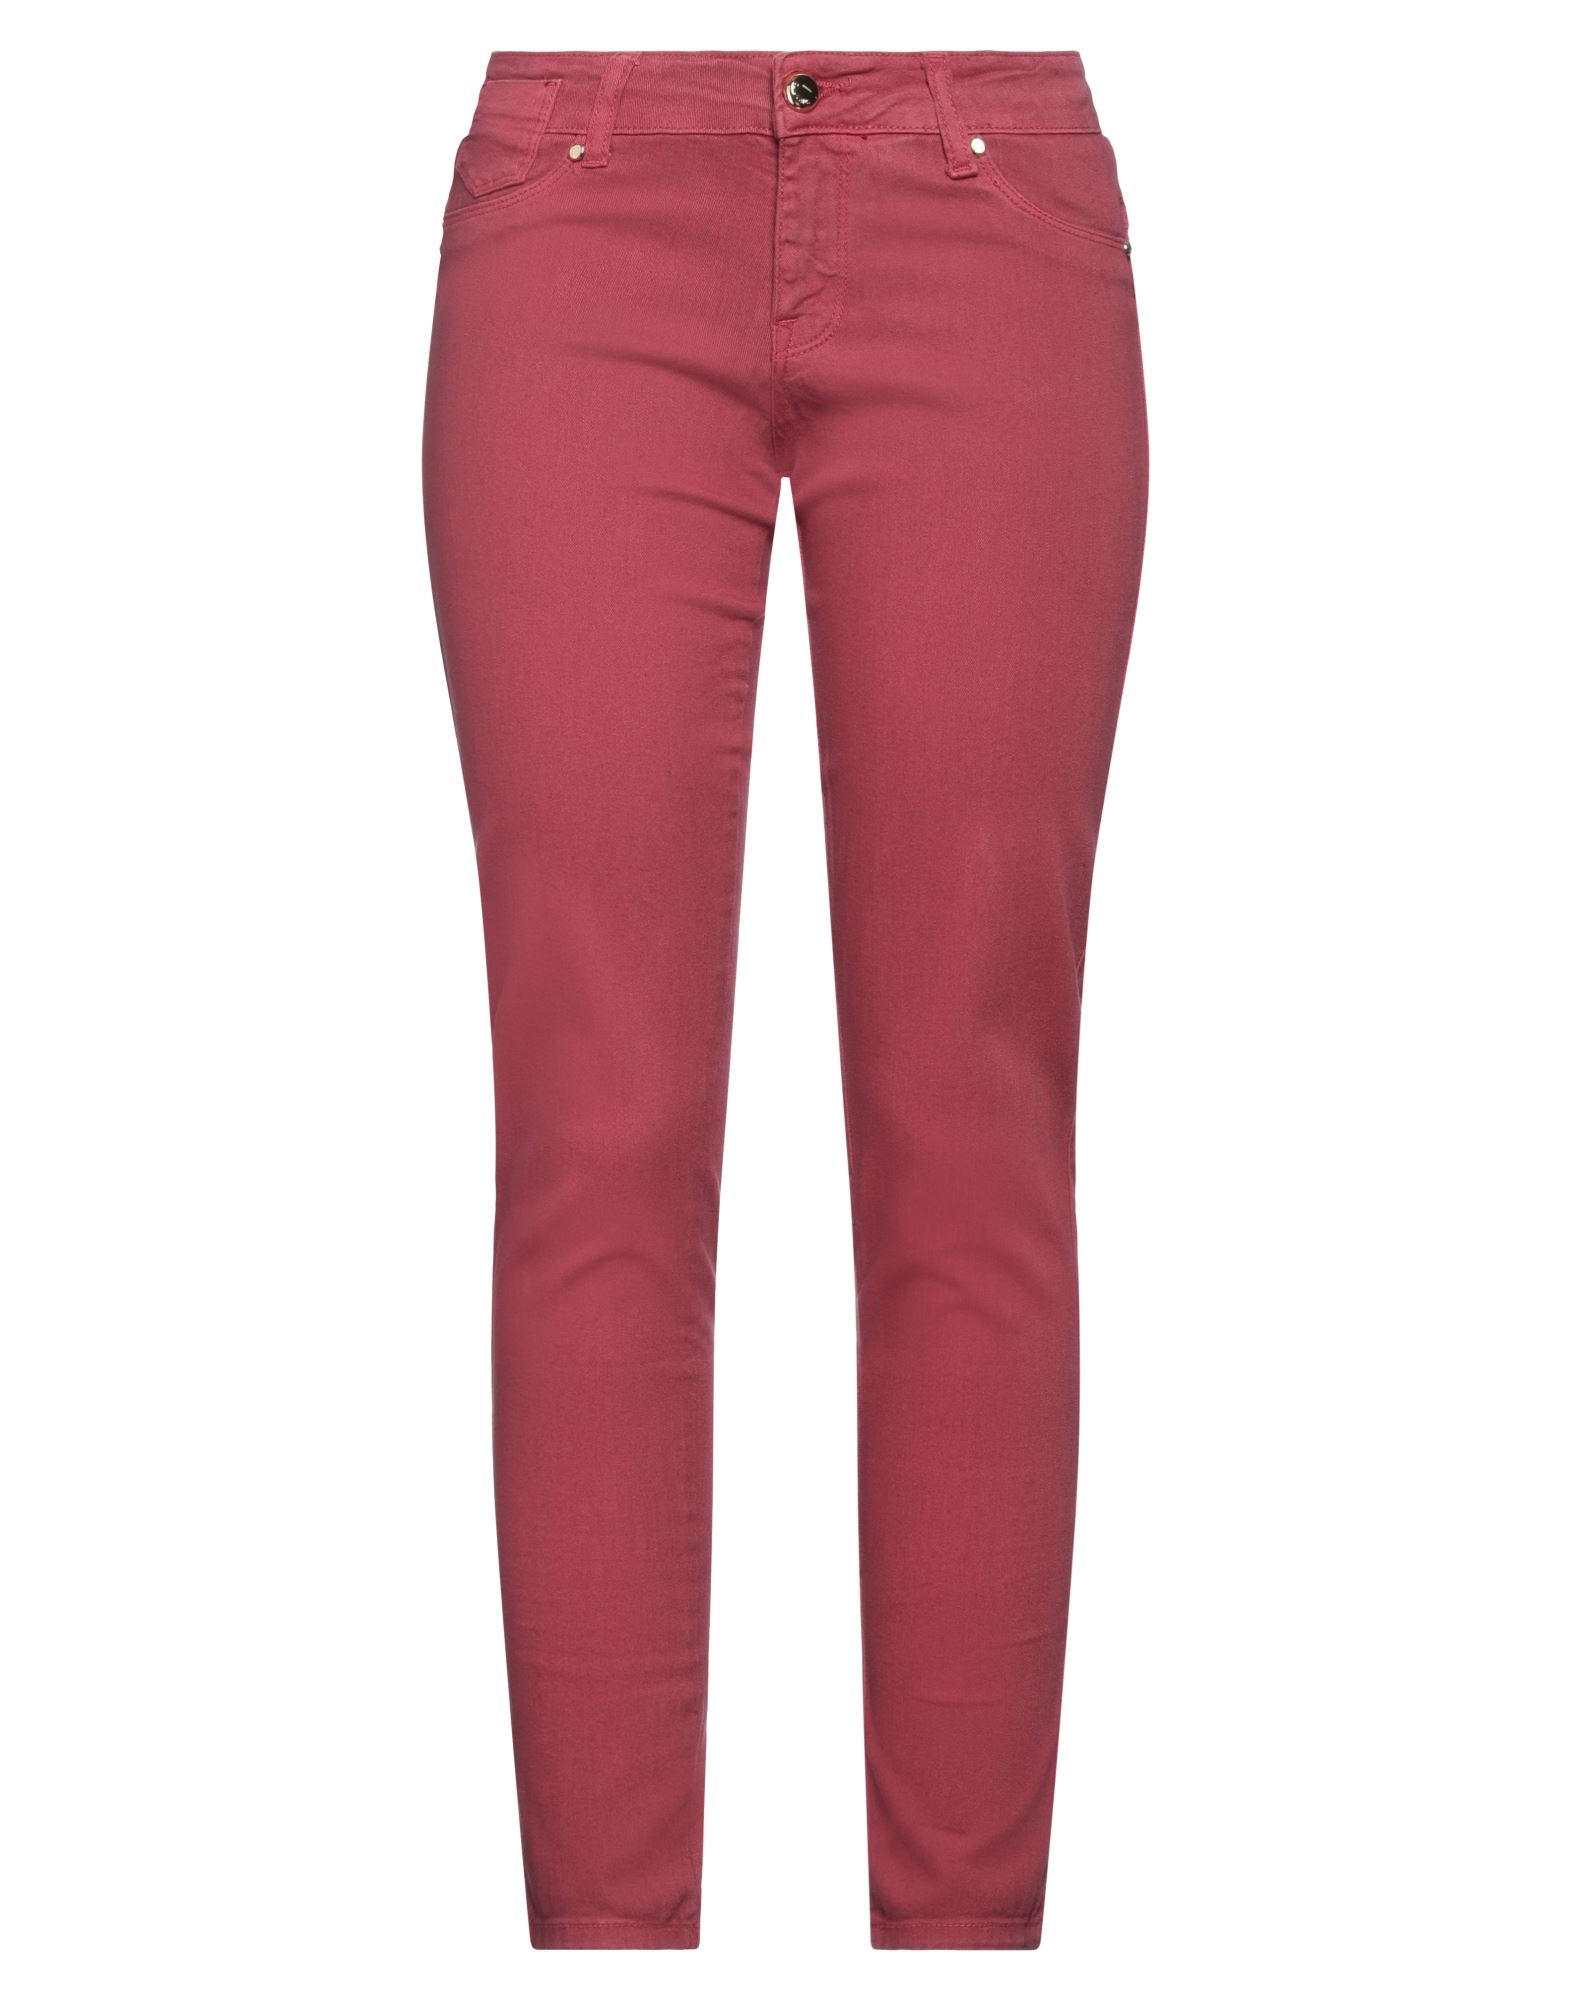 Gaudì Woman Jeans Brick Red Size 25 Cotton, Polyester, Elastane